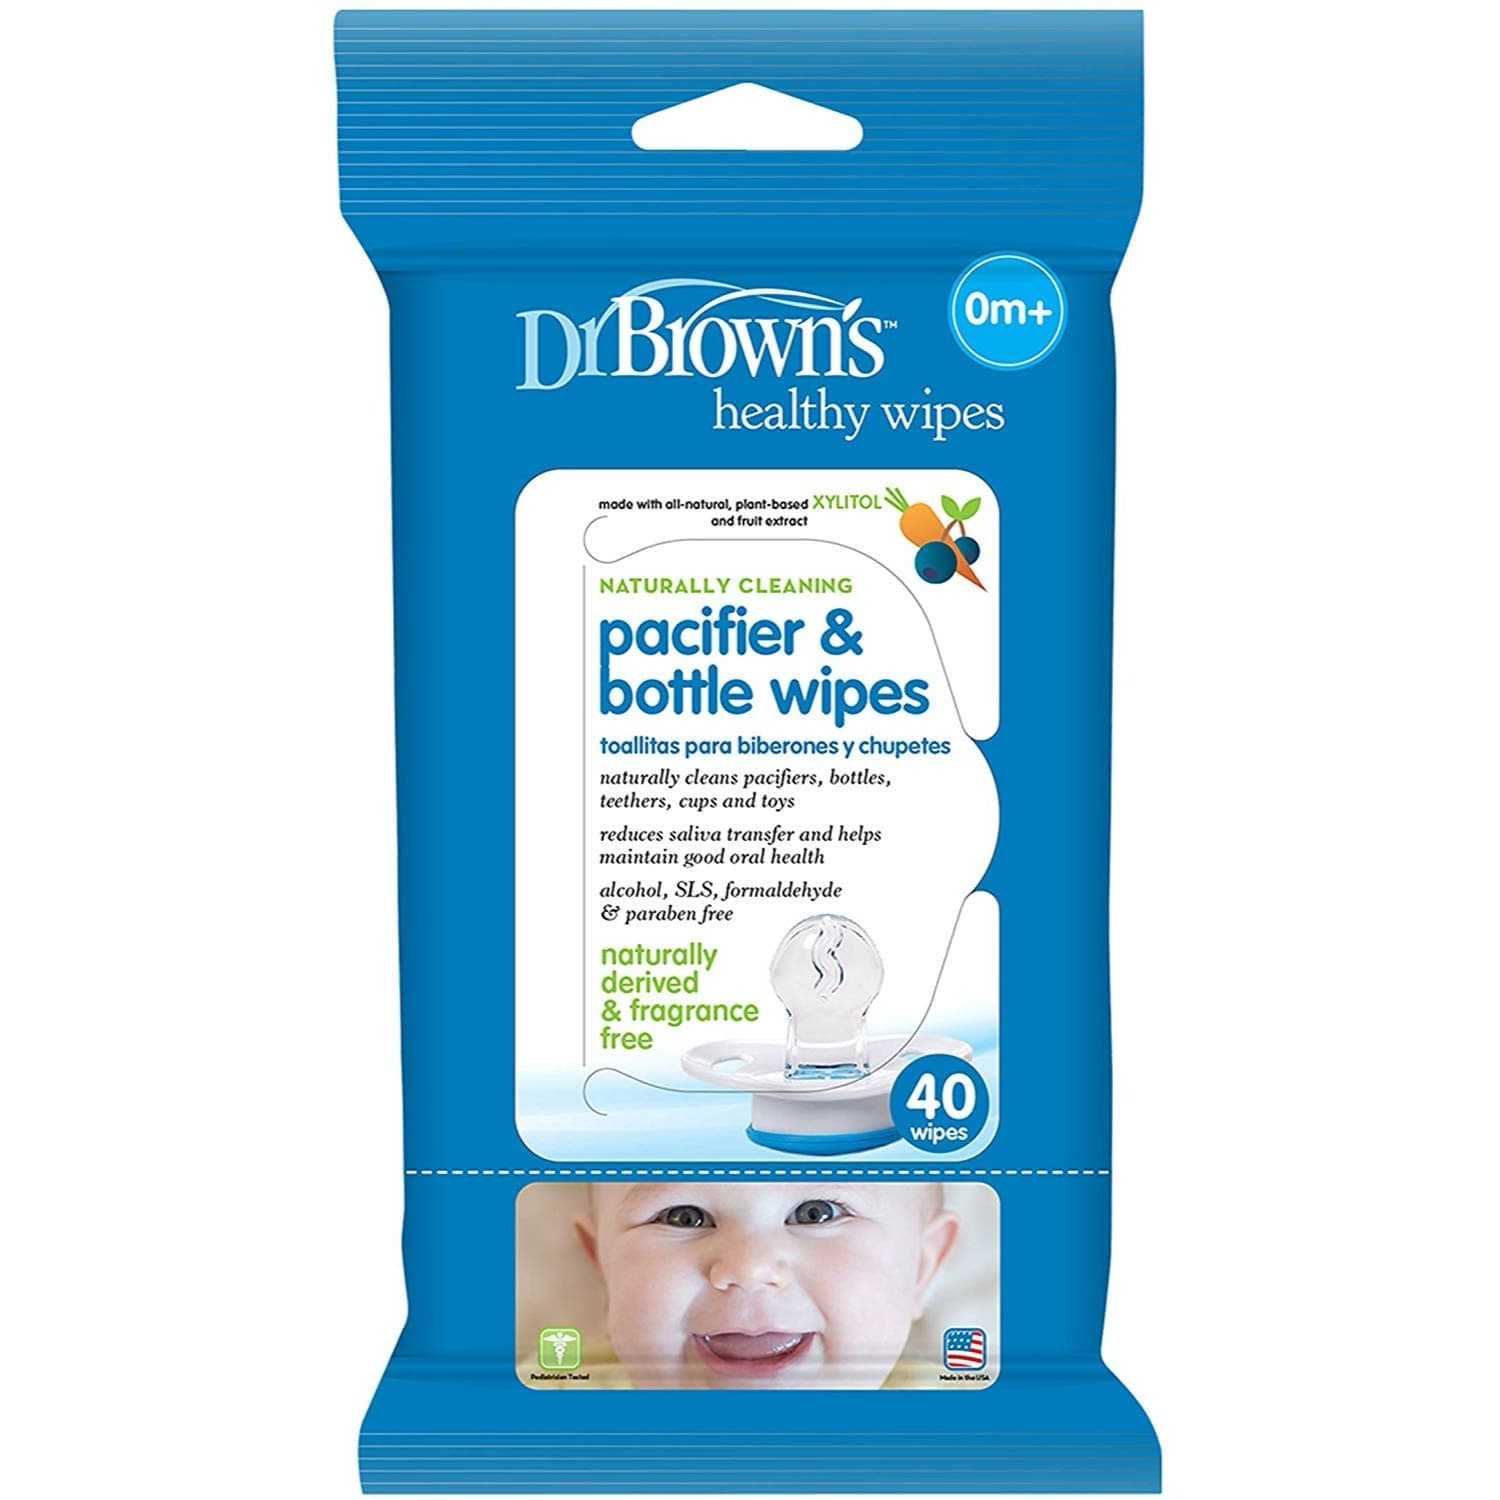 Dr Browns Pacifier & Bottle Wipes, 40-Pack.